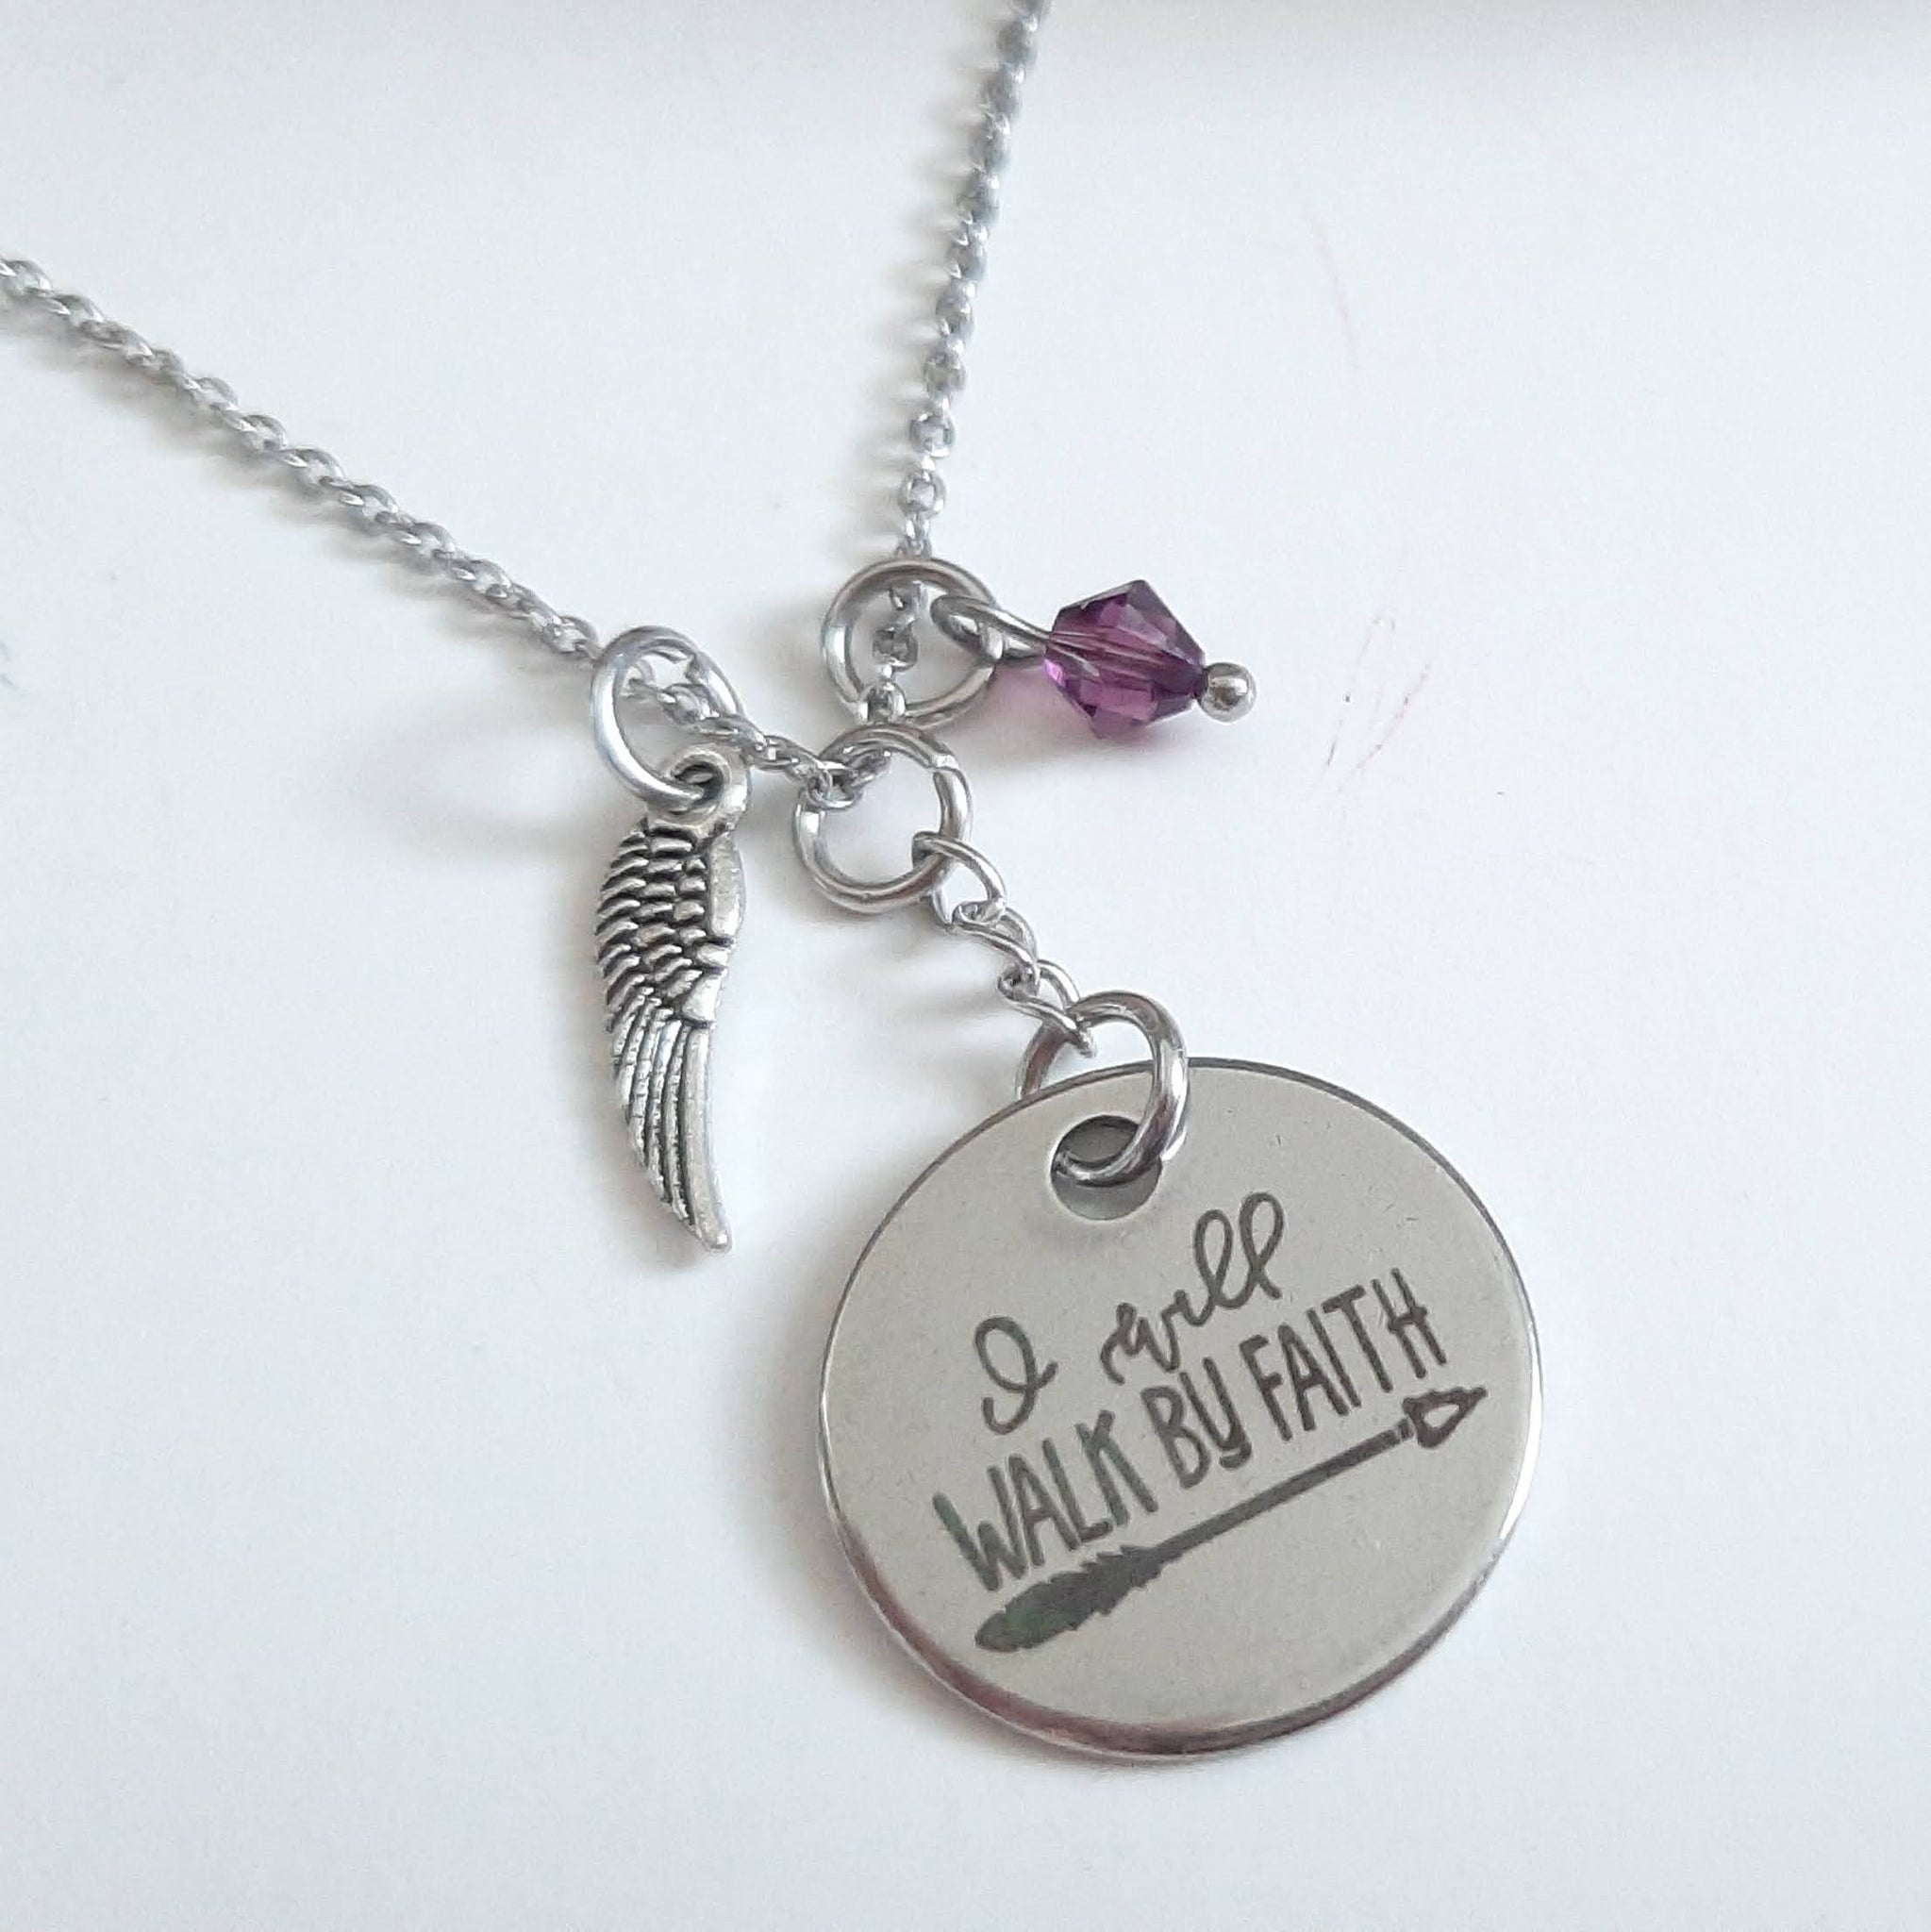 Christian Inspirational Message Pendant Necklace "I Will Walk By Faith" Your Choice of Charm and Birthstone Color